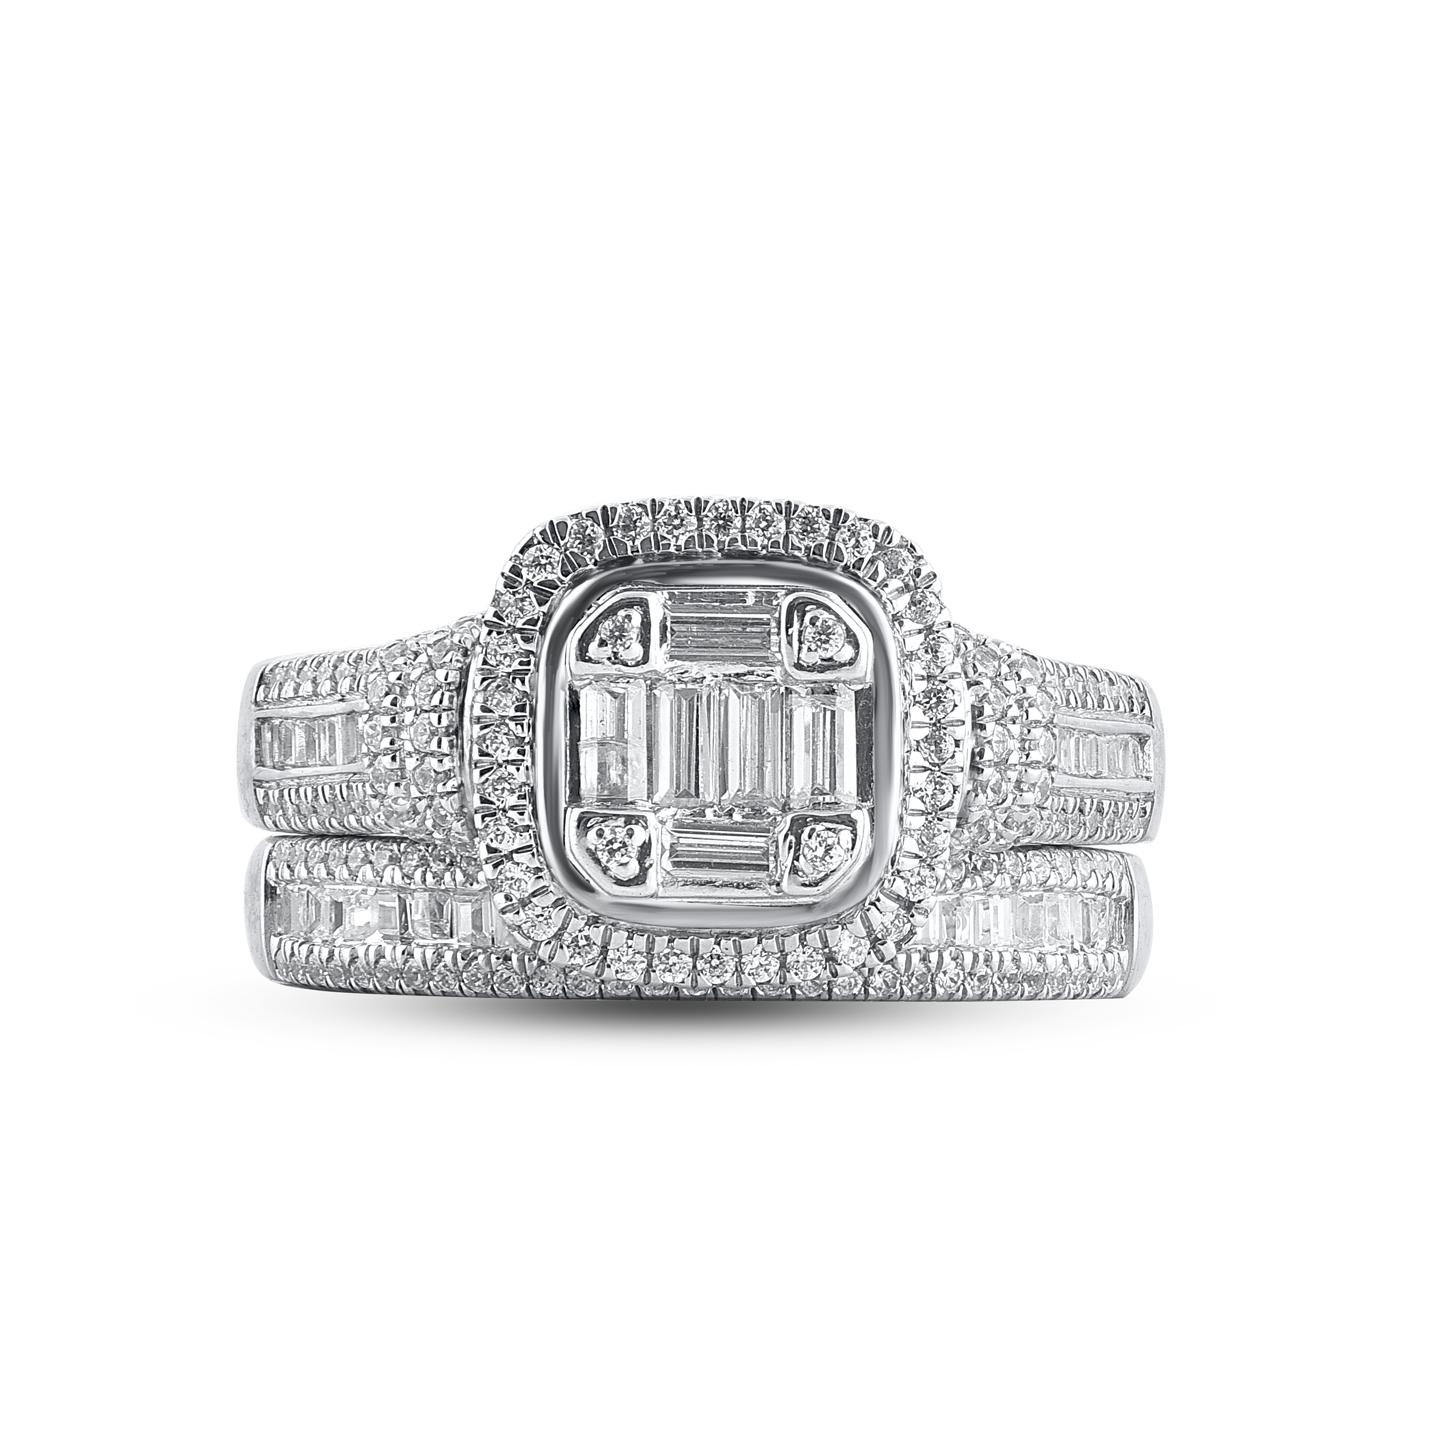 Win her heart with this classic and elegant diamond frame bridal ring set. Crafted in 14 Karat white gold. This wedding ring features a sparkling 224 single cut round diamonds and baguette cut diamonds beautifully set in prong, pave and channel